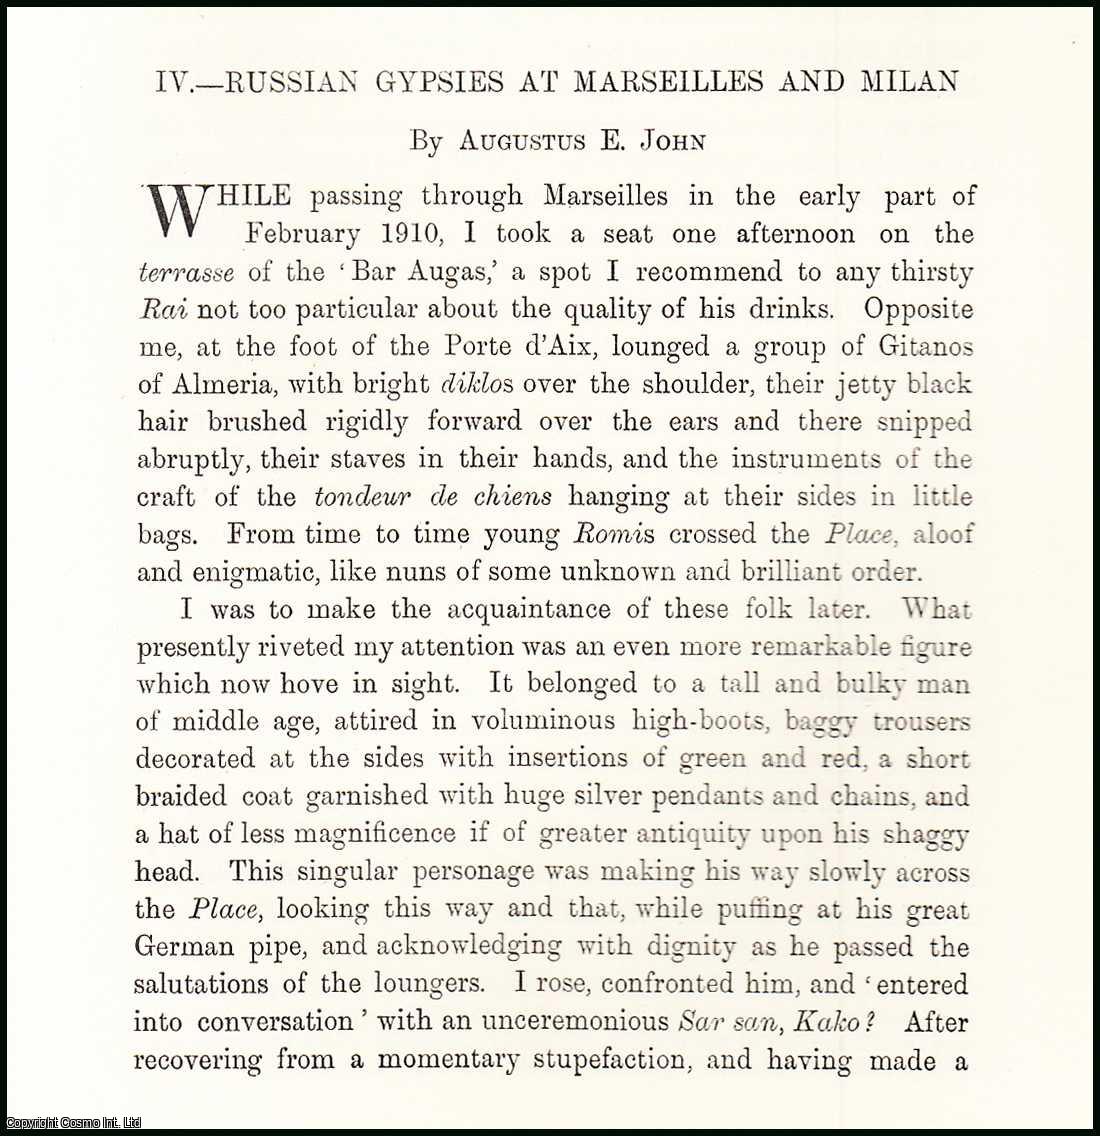 Augustus E. John - Russian Gypsies at Marseilles & Milan. An uncommon original article from the Journal of the Gypsy Lore Society, 1911.